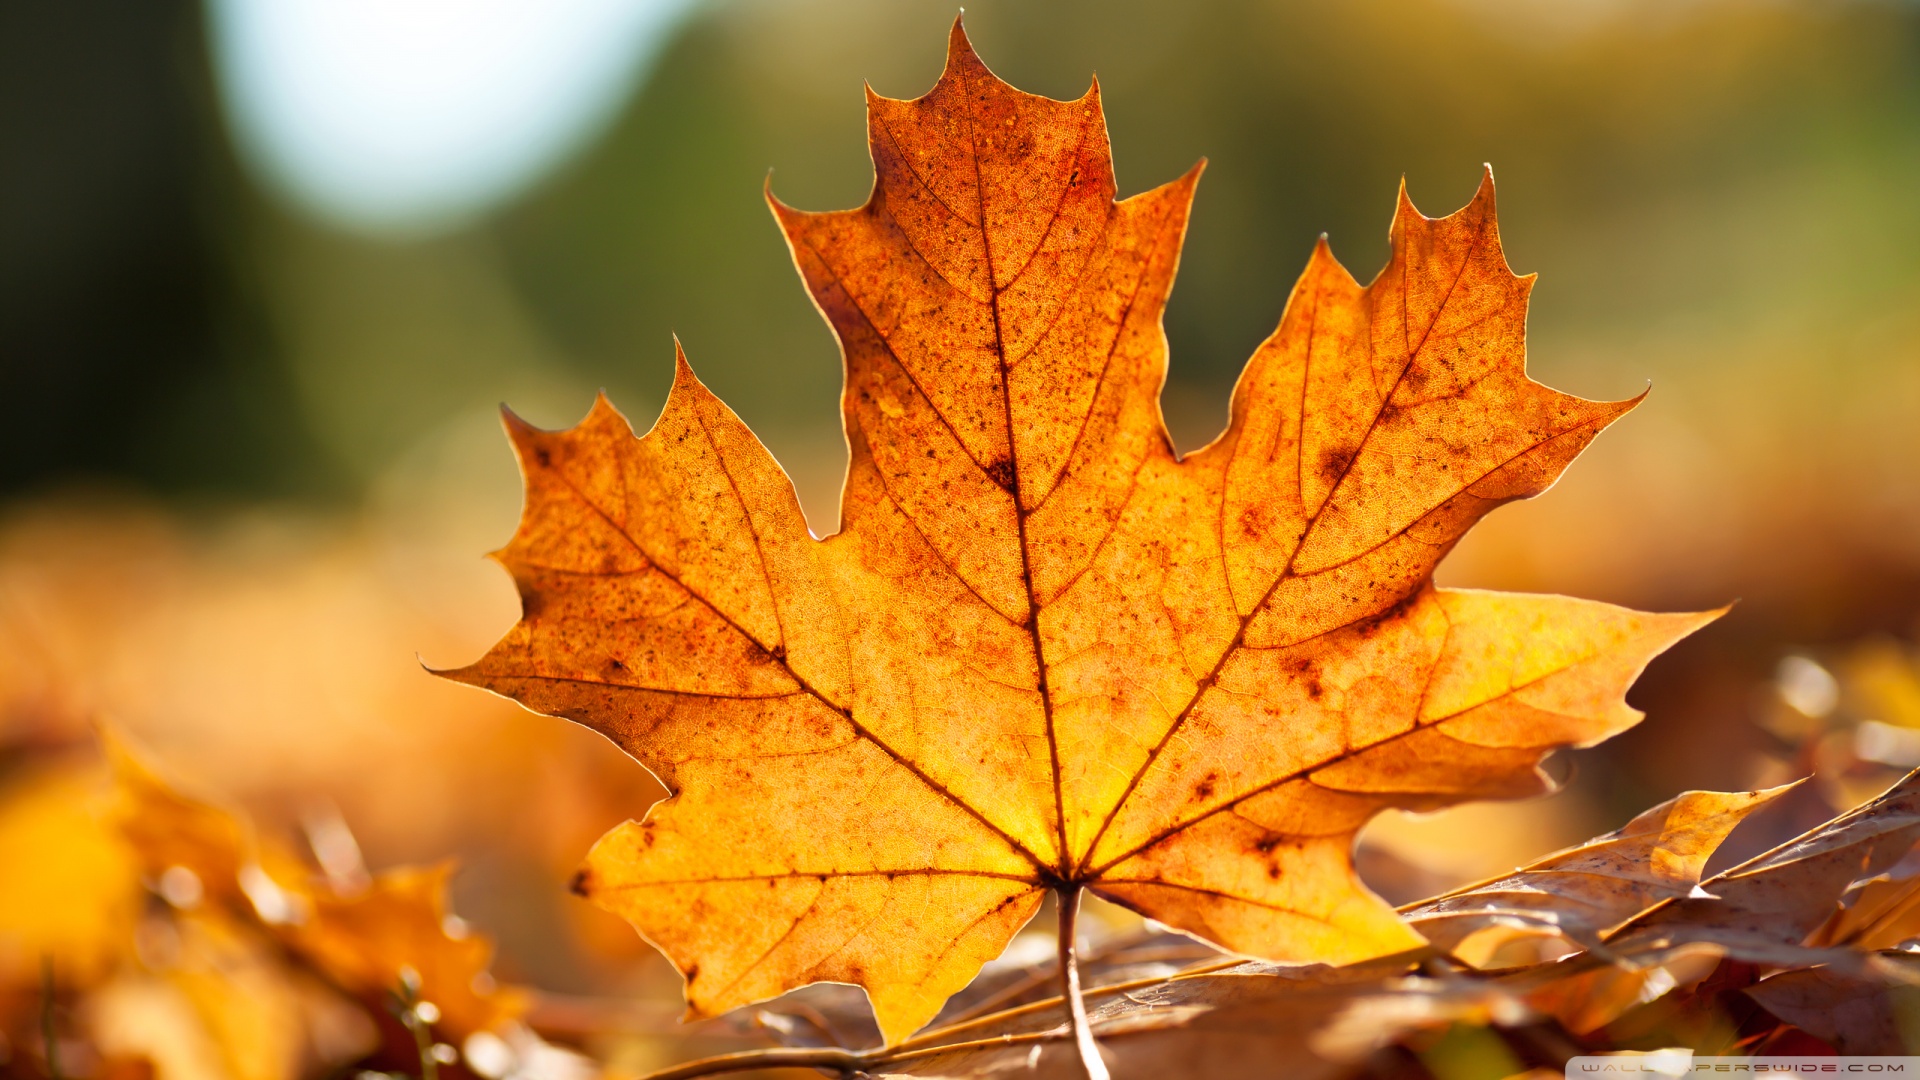 HD Fall Leaves Wallpaper Image Amp Pictures Becuo